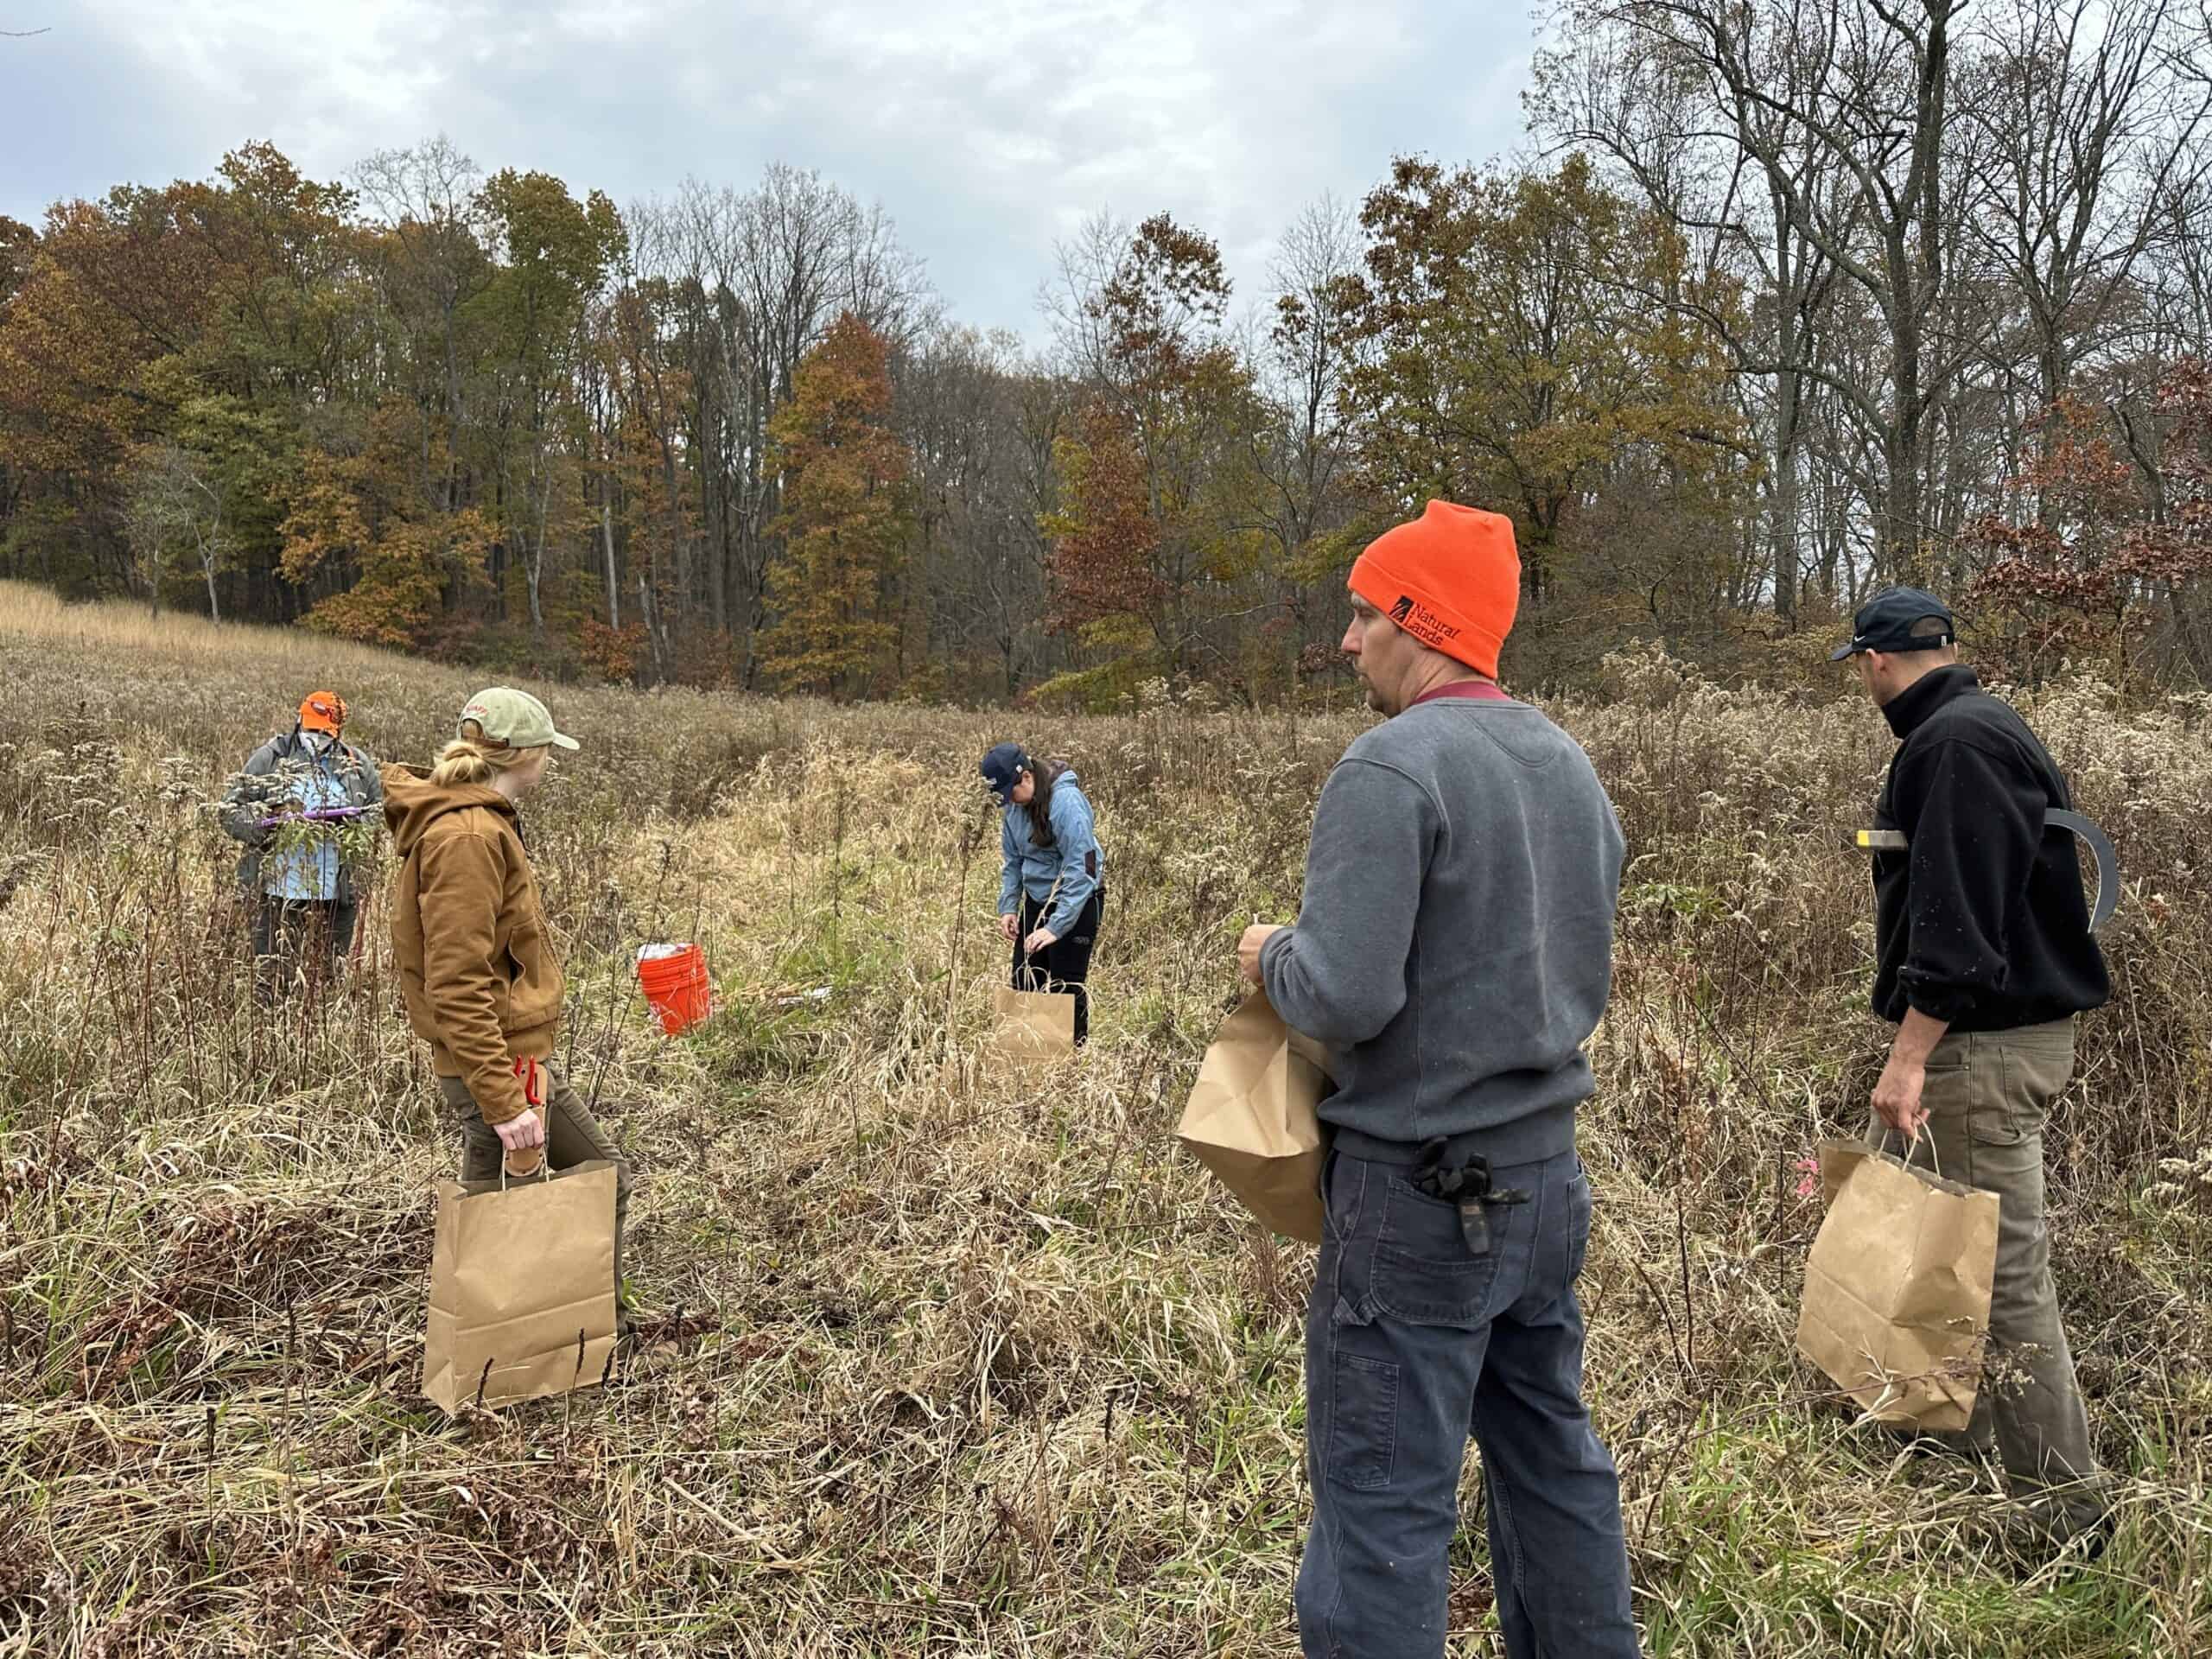 Crow's Nest and Mt. Cuba staff in a November meadow with paper bags of wildflower seed being collected.